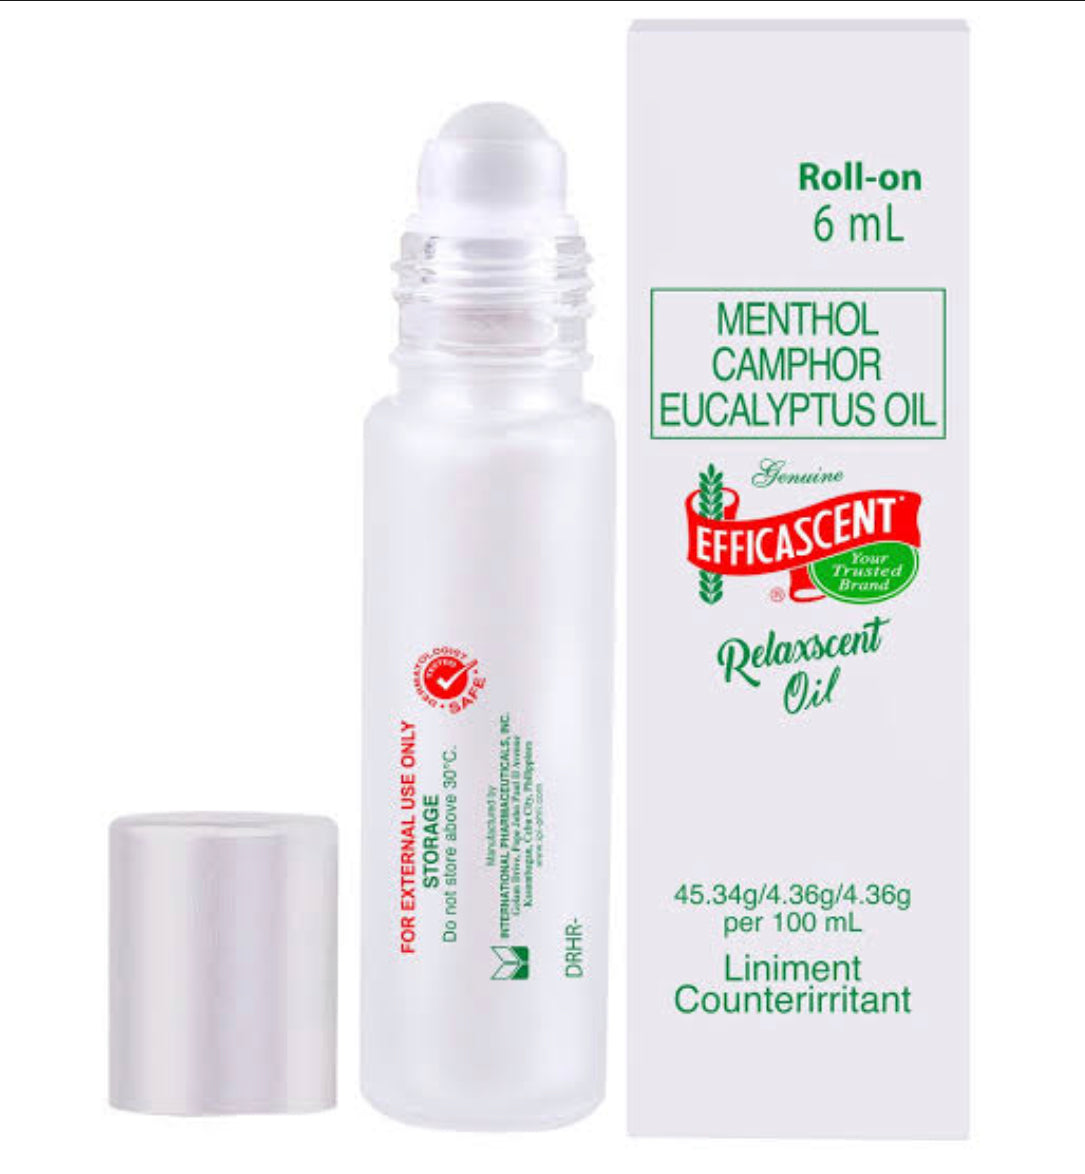 Efficascent Oil Roll-On 6ml